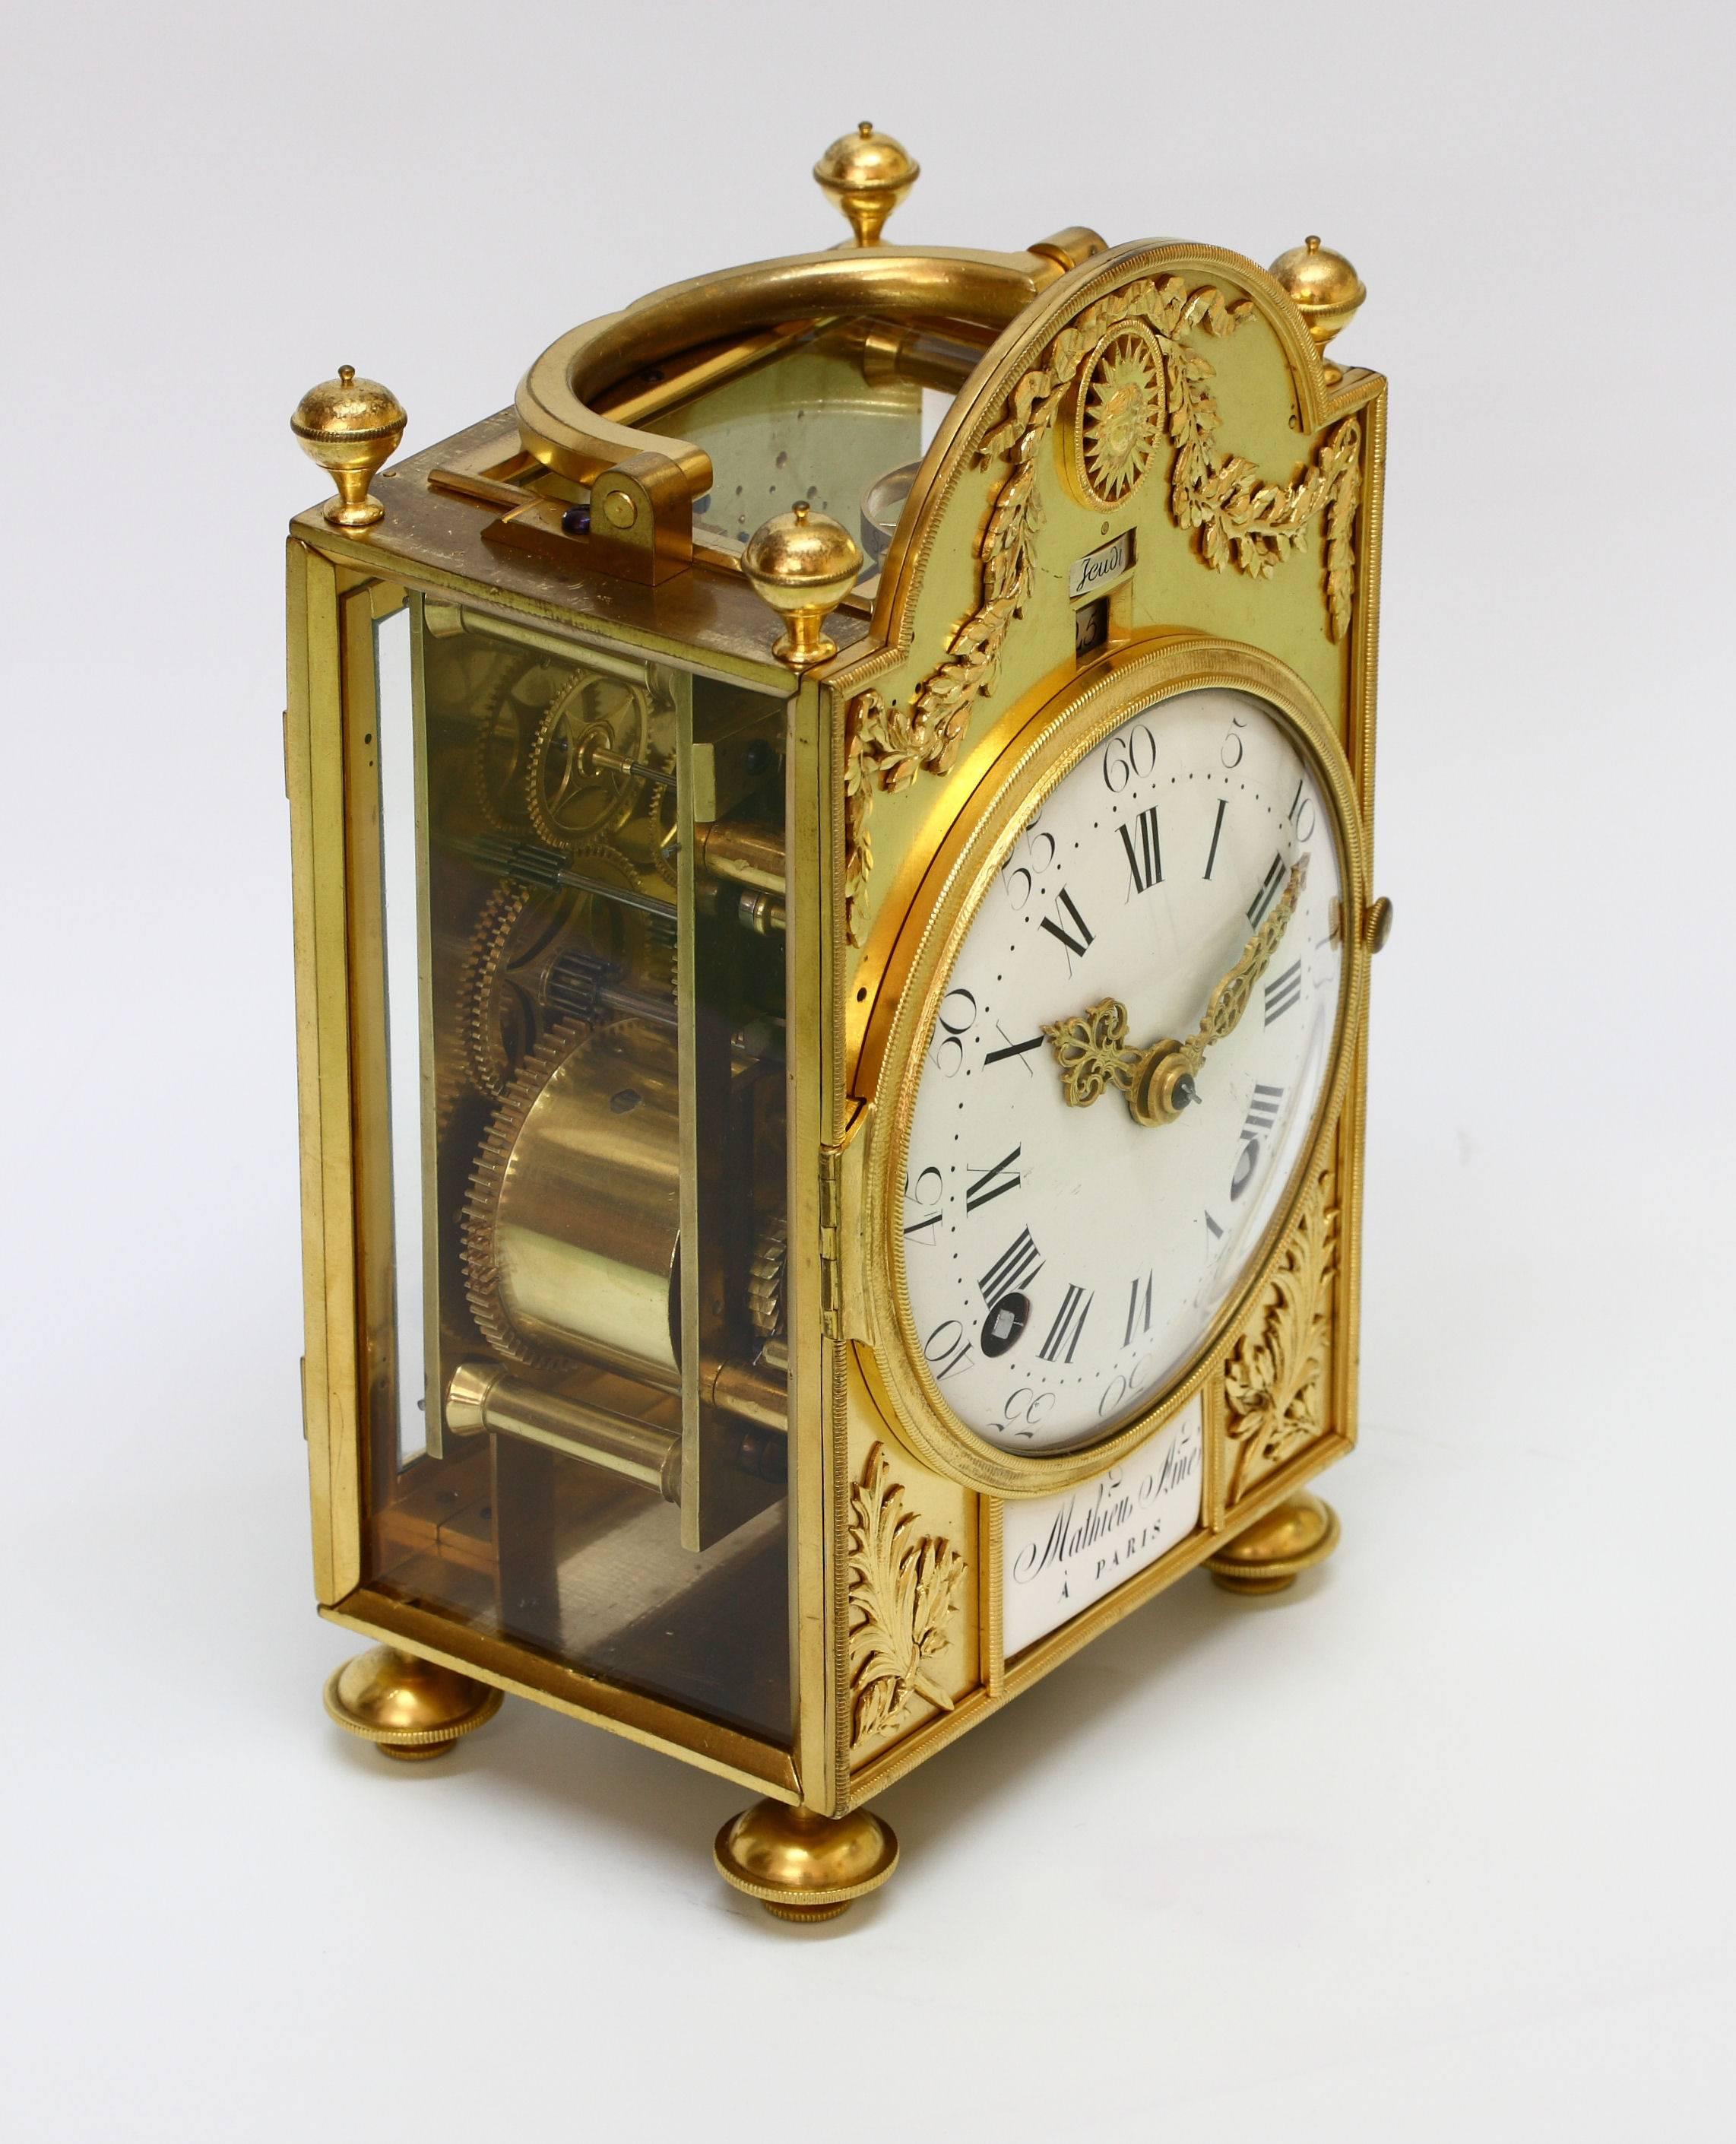 Small portable table clock signed Mathieu l'Aîné A Paris, and dated 1776. Eight day duration rectangular movement with two simplified Maltese crosses on the barrels. Rack strike for the hours and half hours on a silvered bell situated below. Later